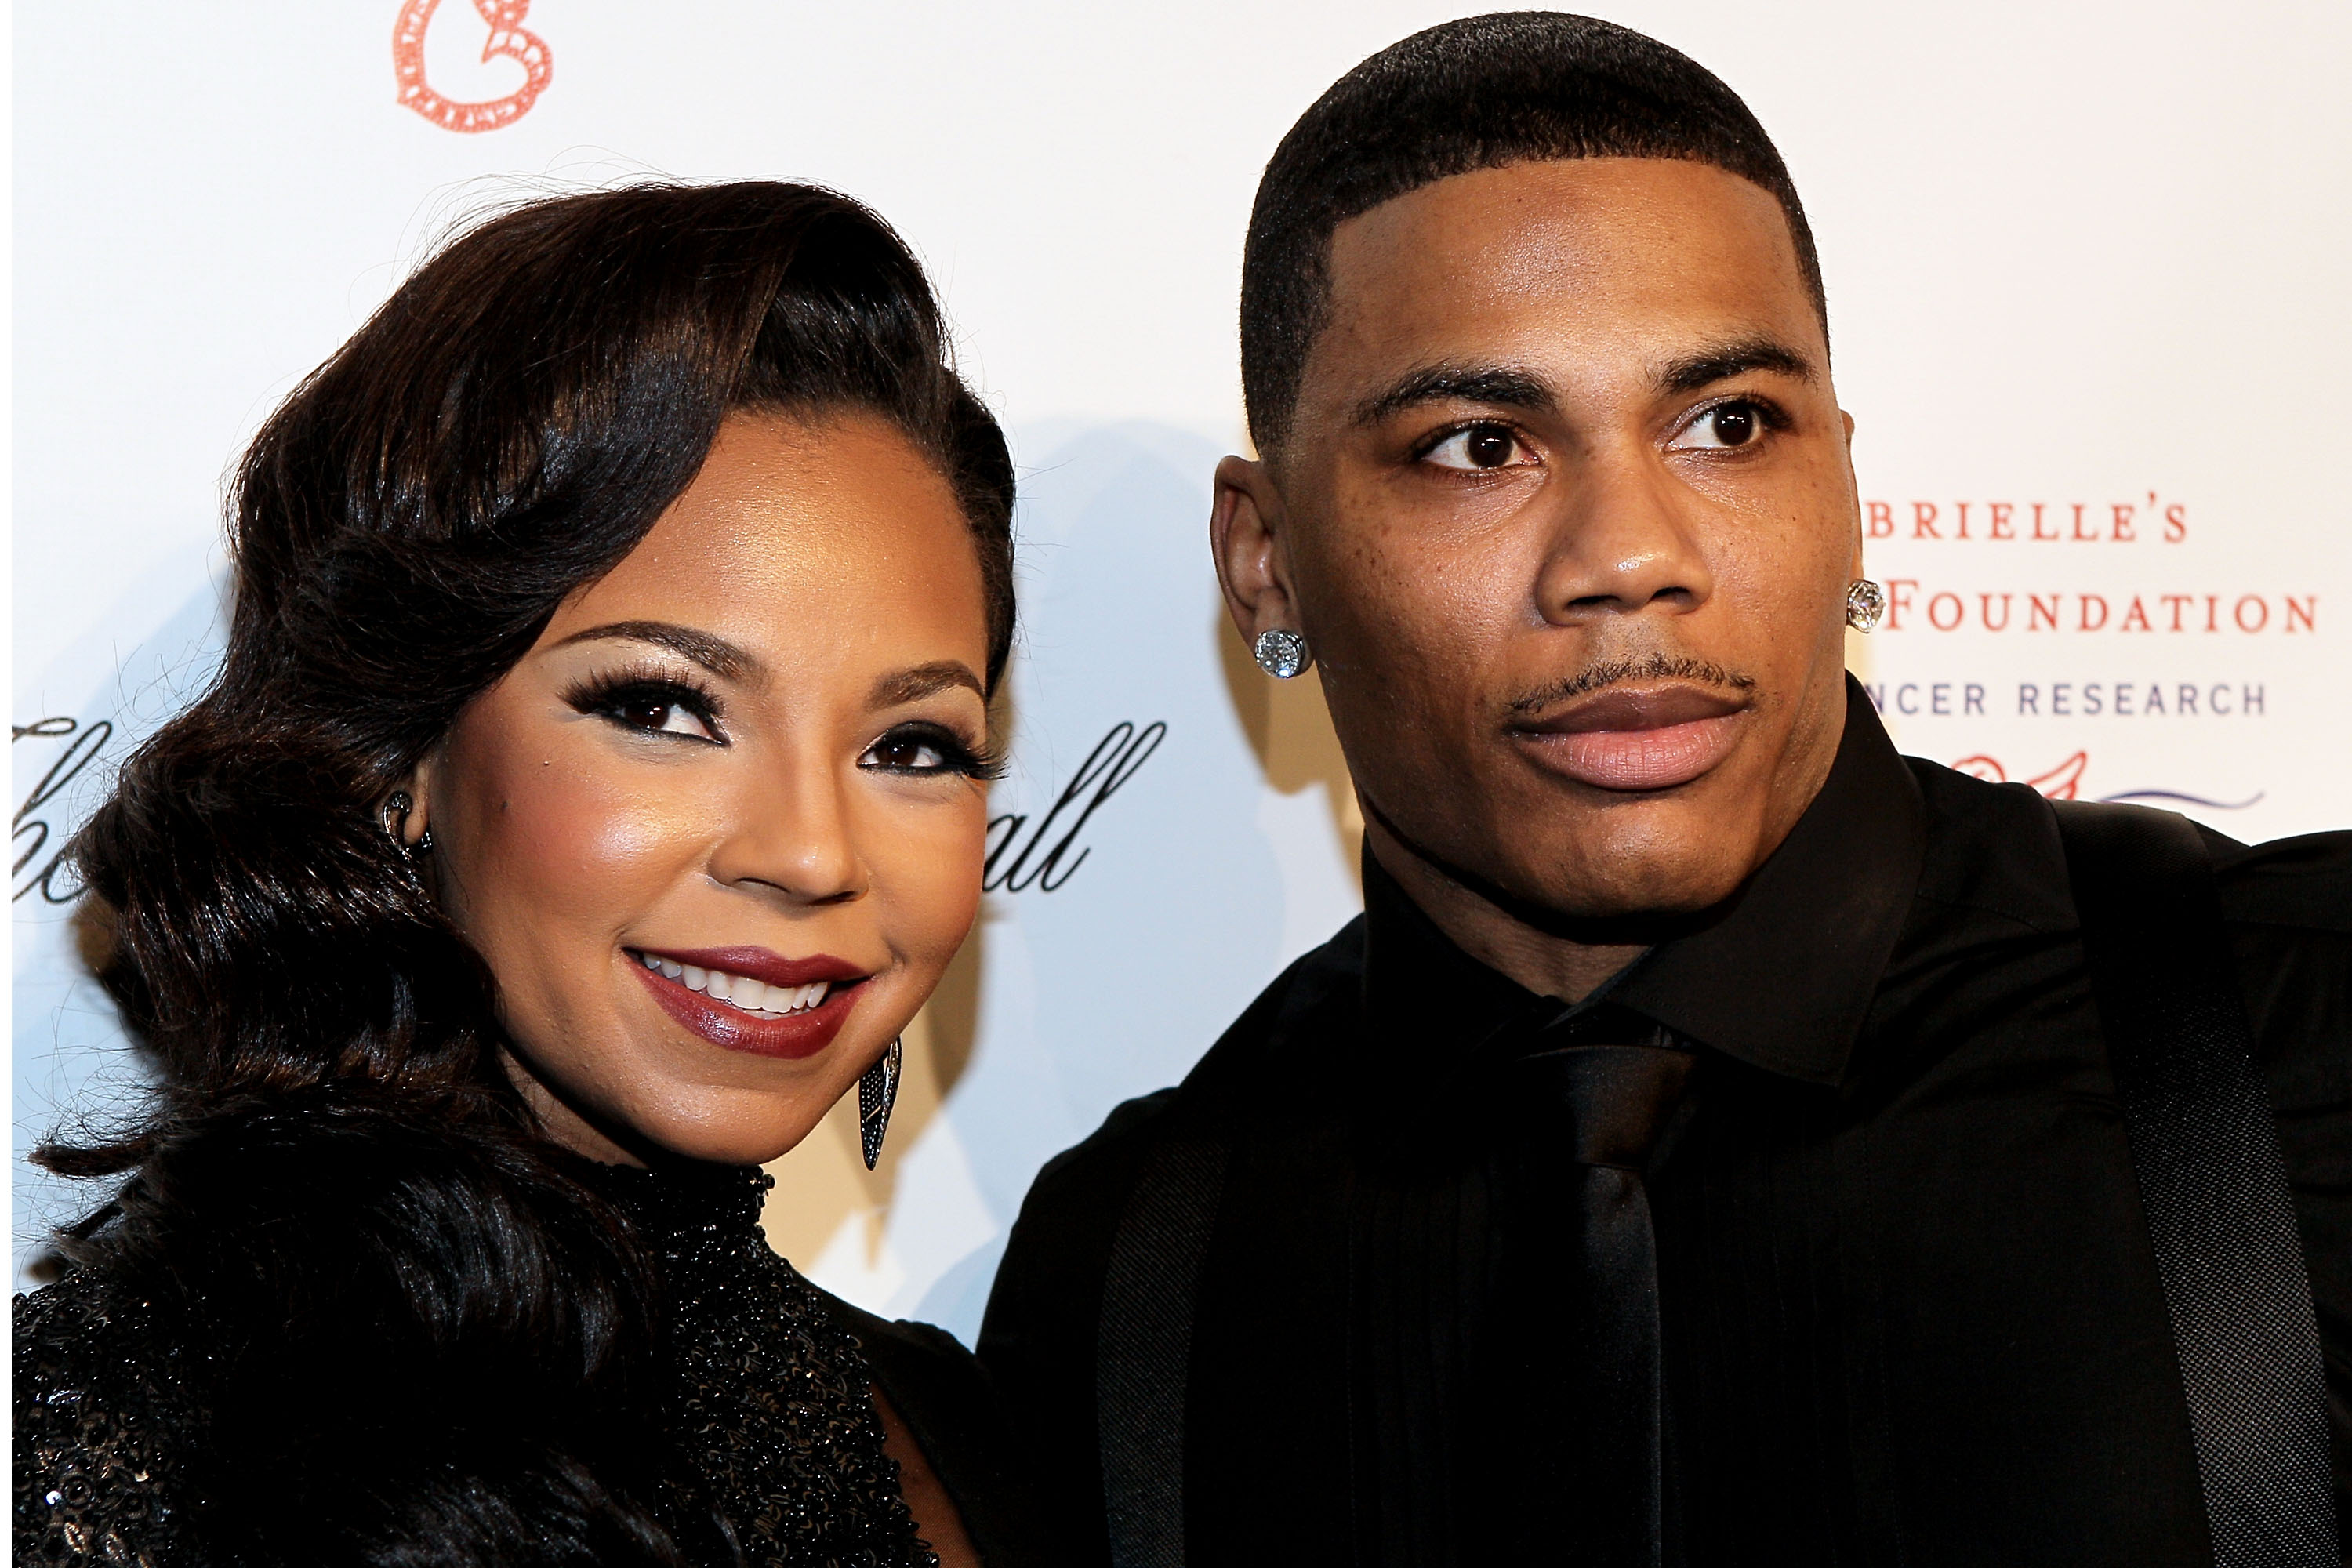 Ashanti and Nelly attendsthe Angel Ball 2012 at Cipriani Wall Street on October 22, 2012 | Steve Mack/Getty Images